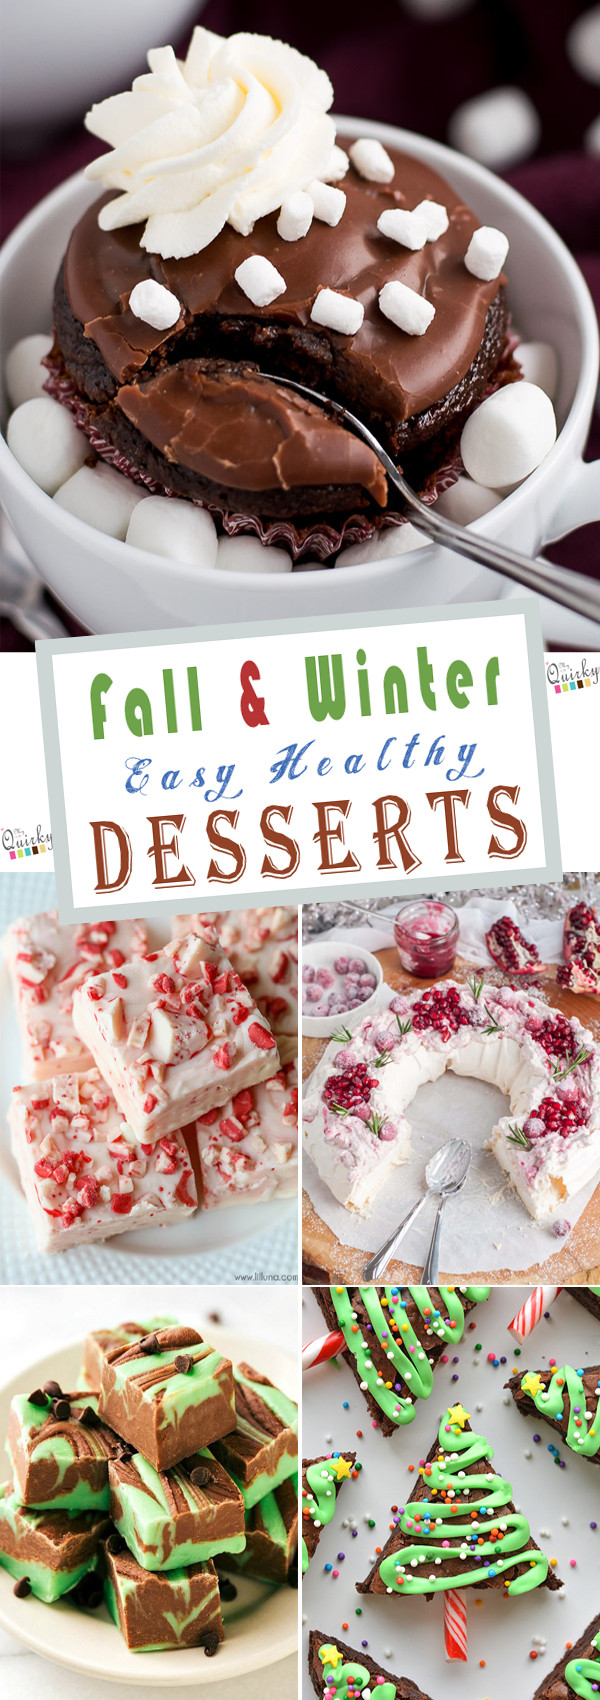 Easy At Home Desserts
 23 Fall & Winter Easy Healthy Desserts To Make At Home